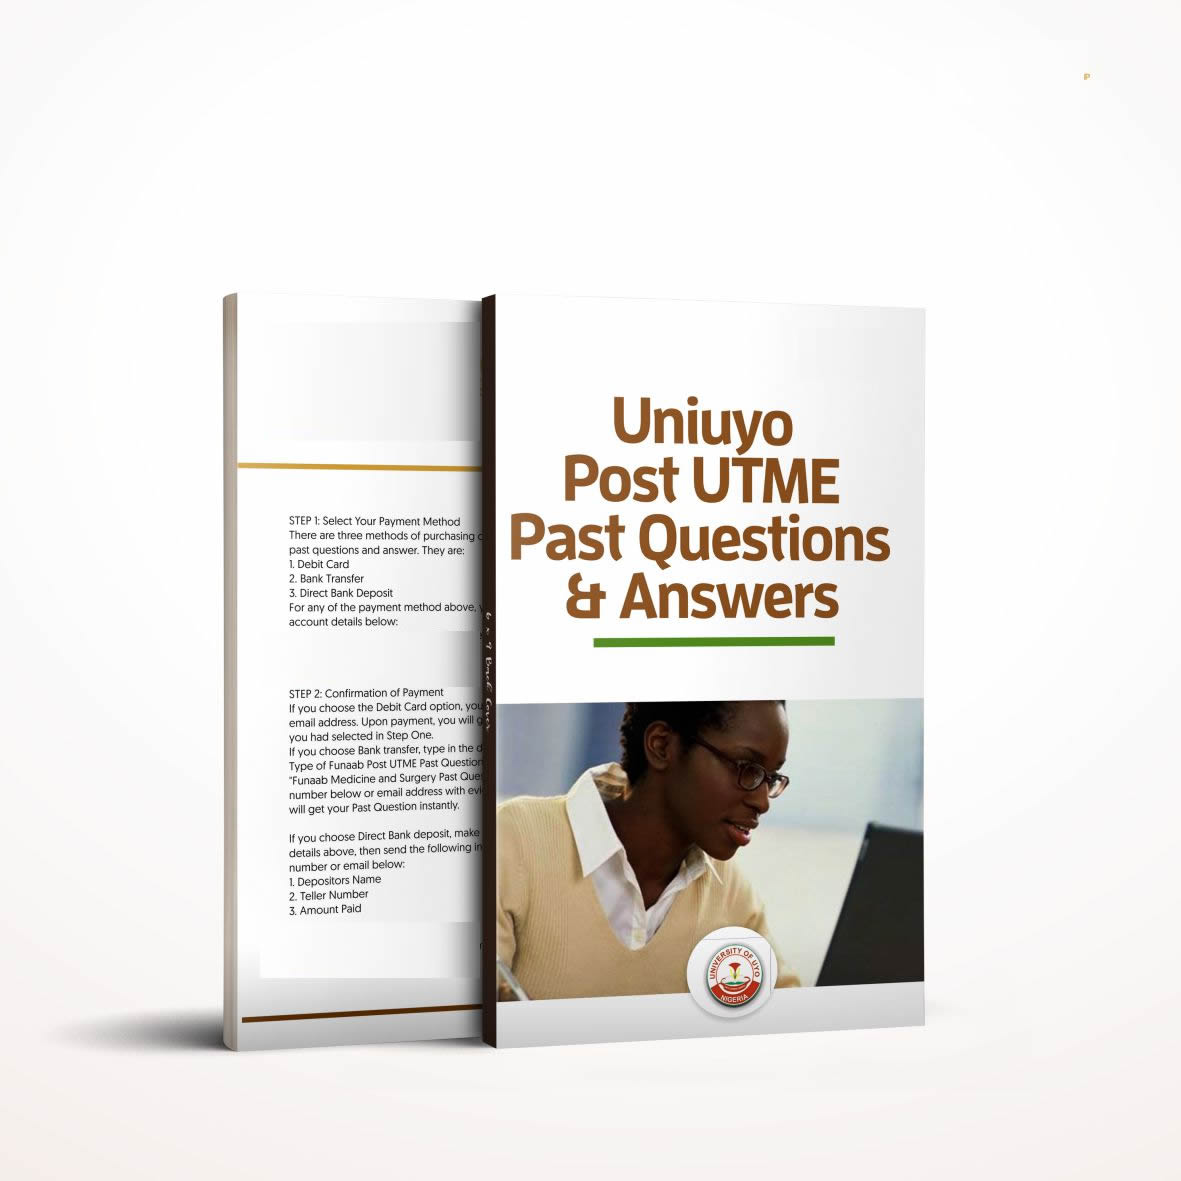 UNIYO Post UTME past questions and answers